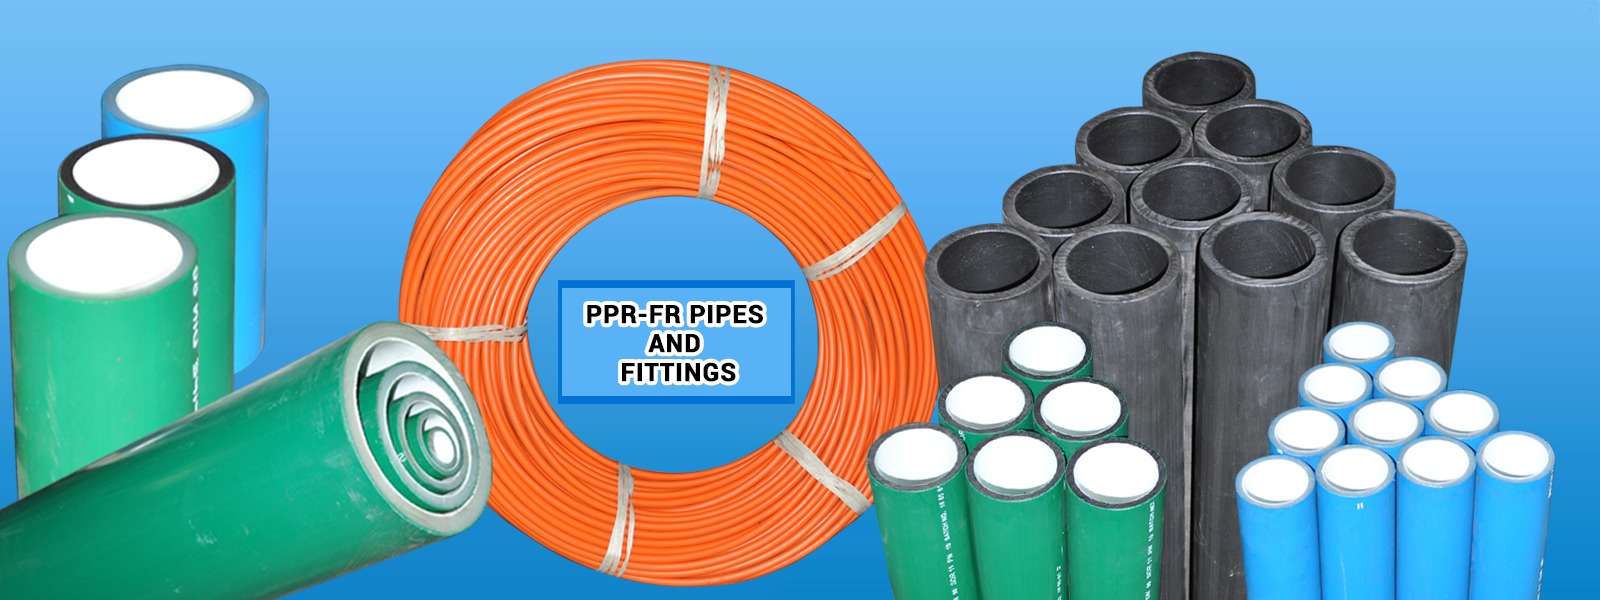 PPR Pipes in Asian Countries